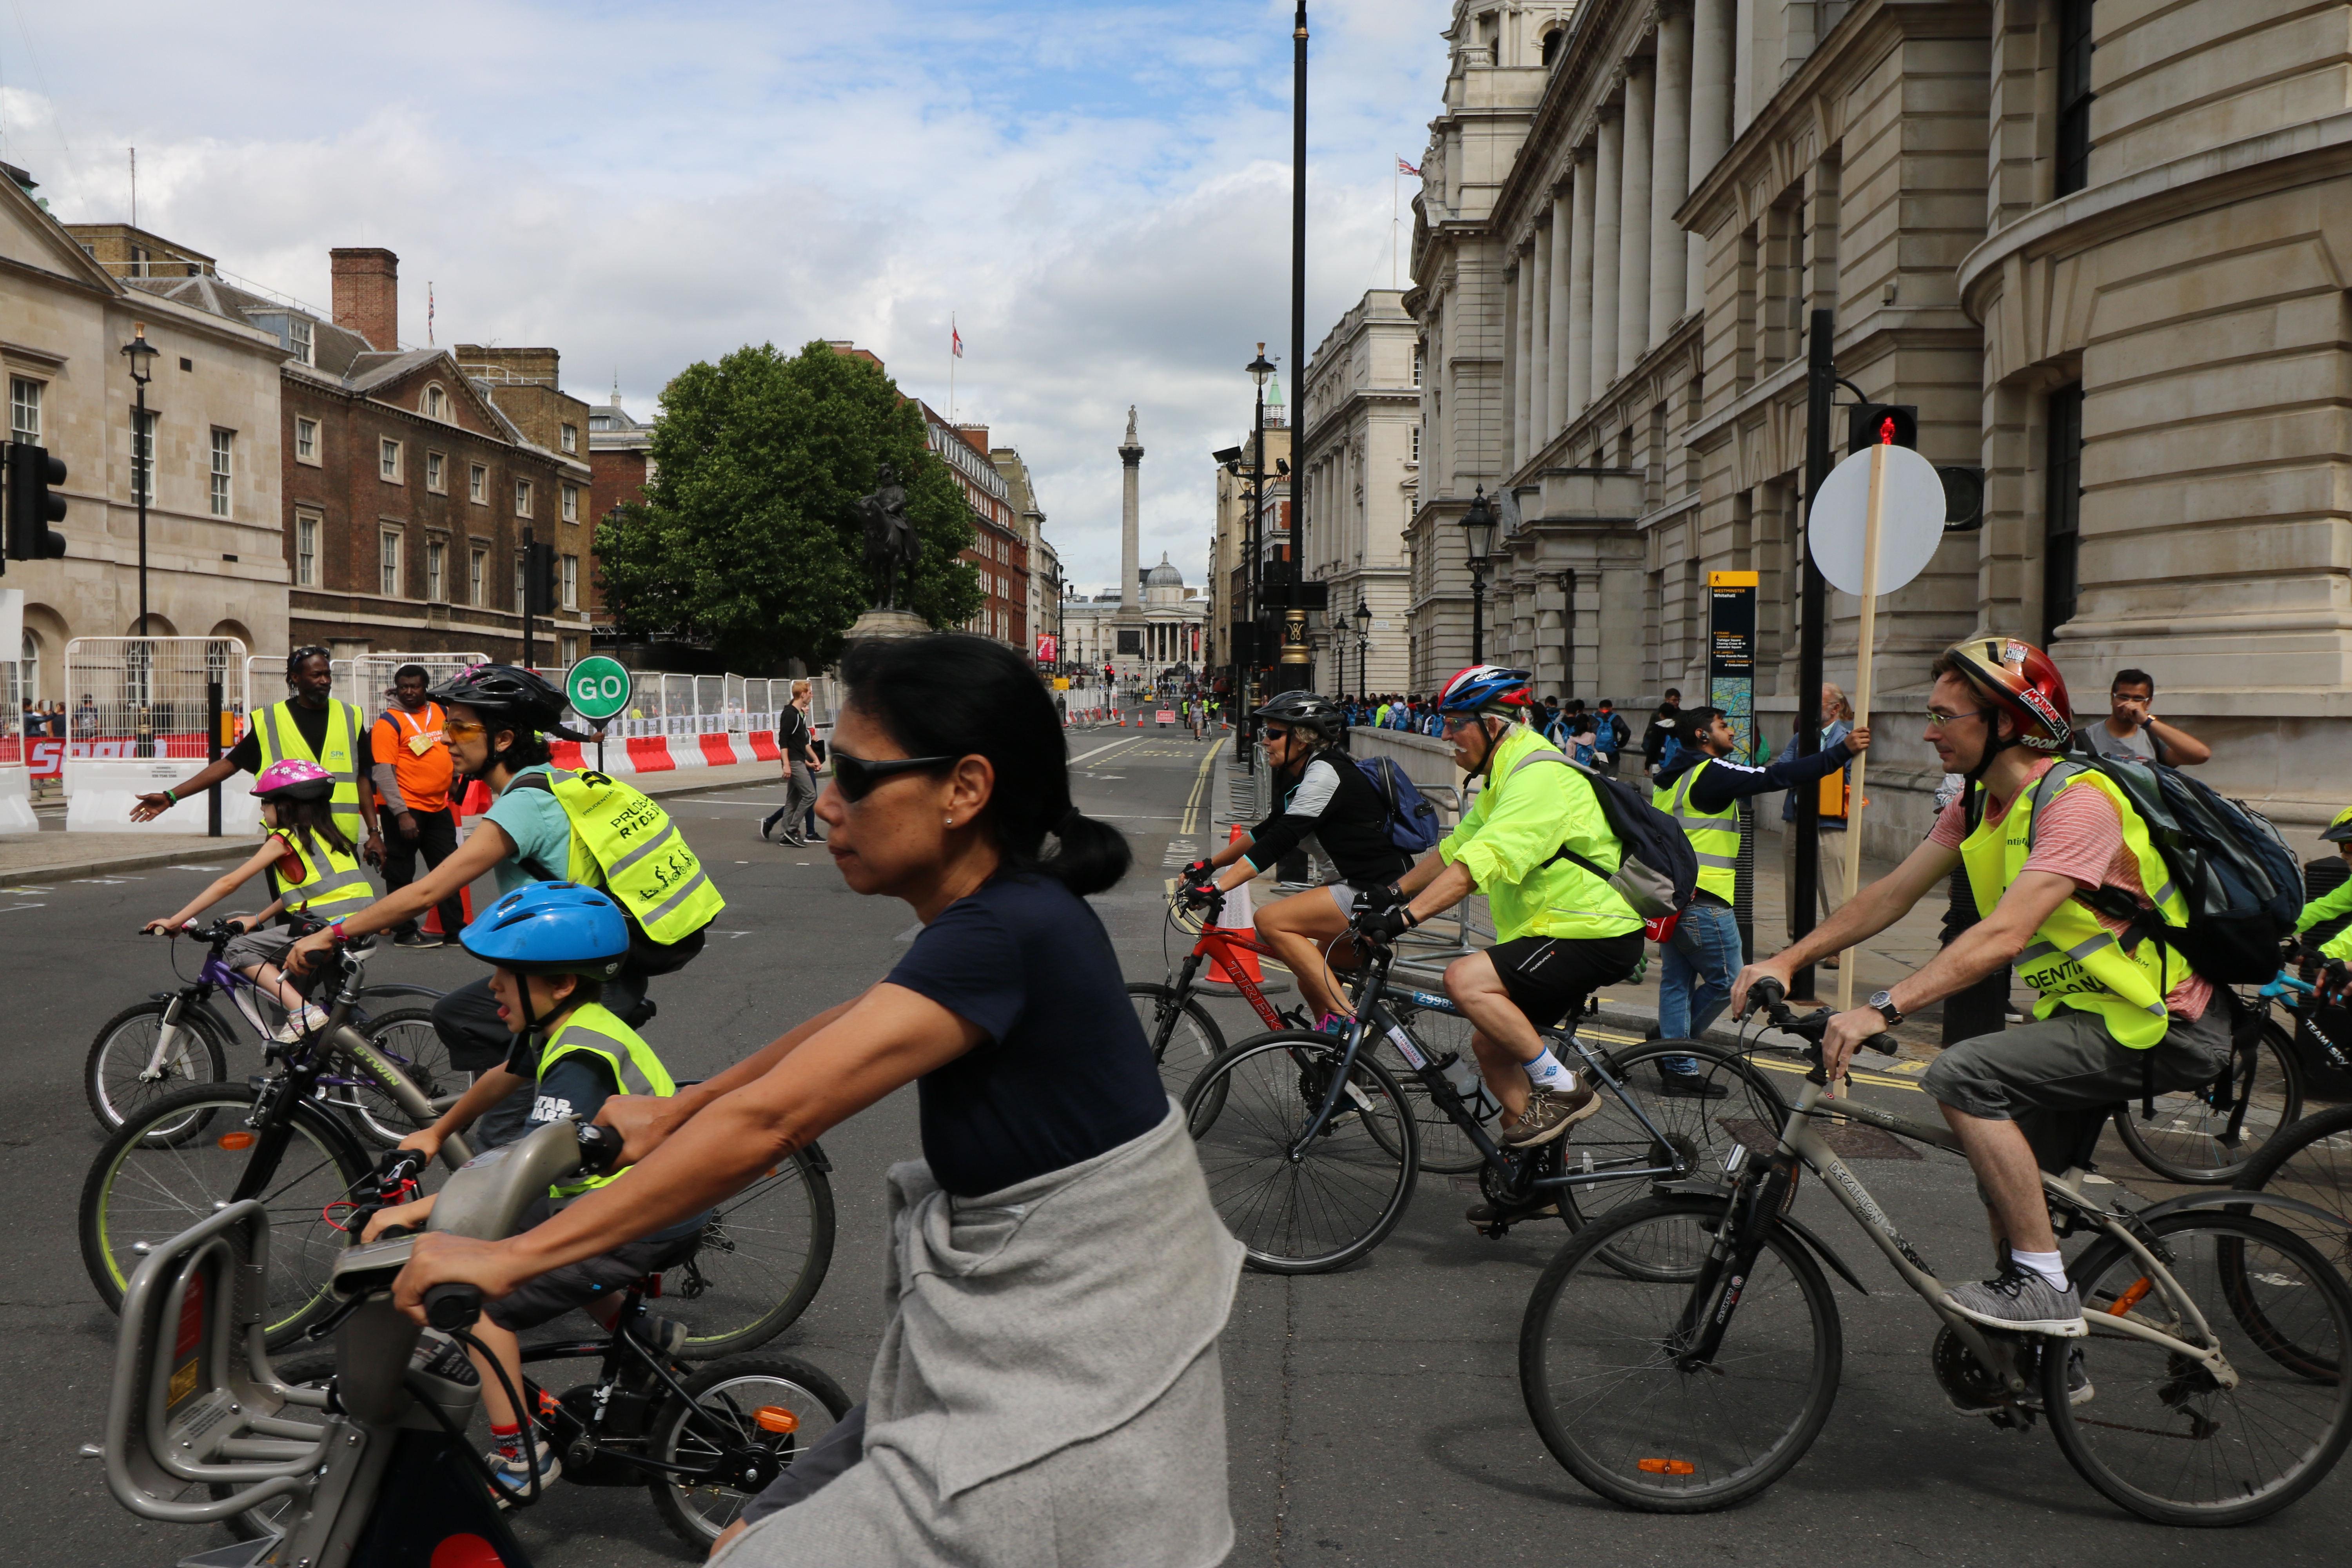 Cycling activity in London